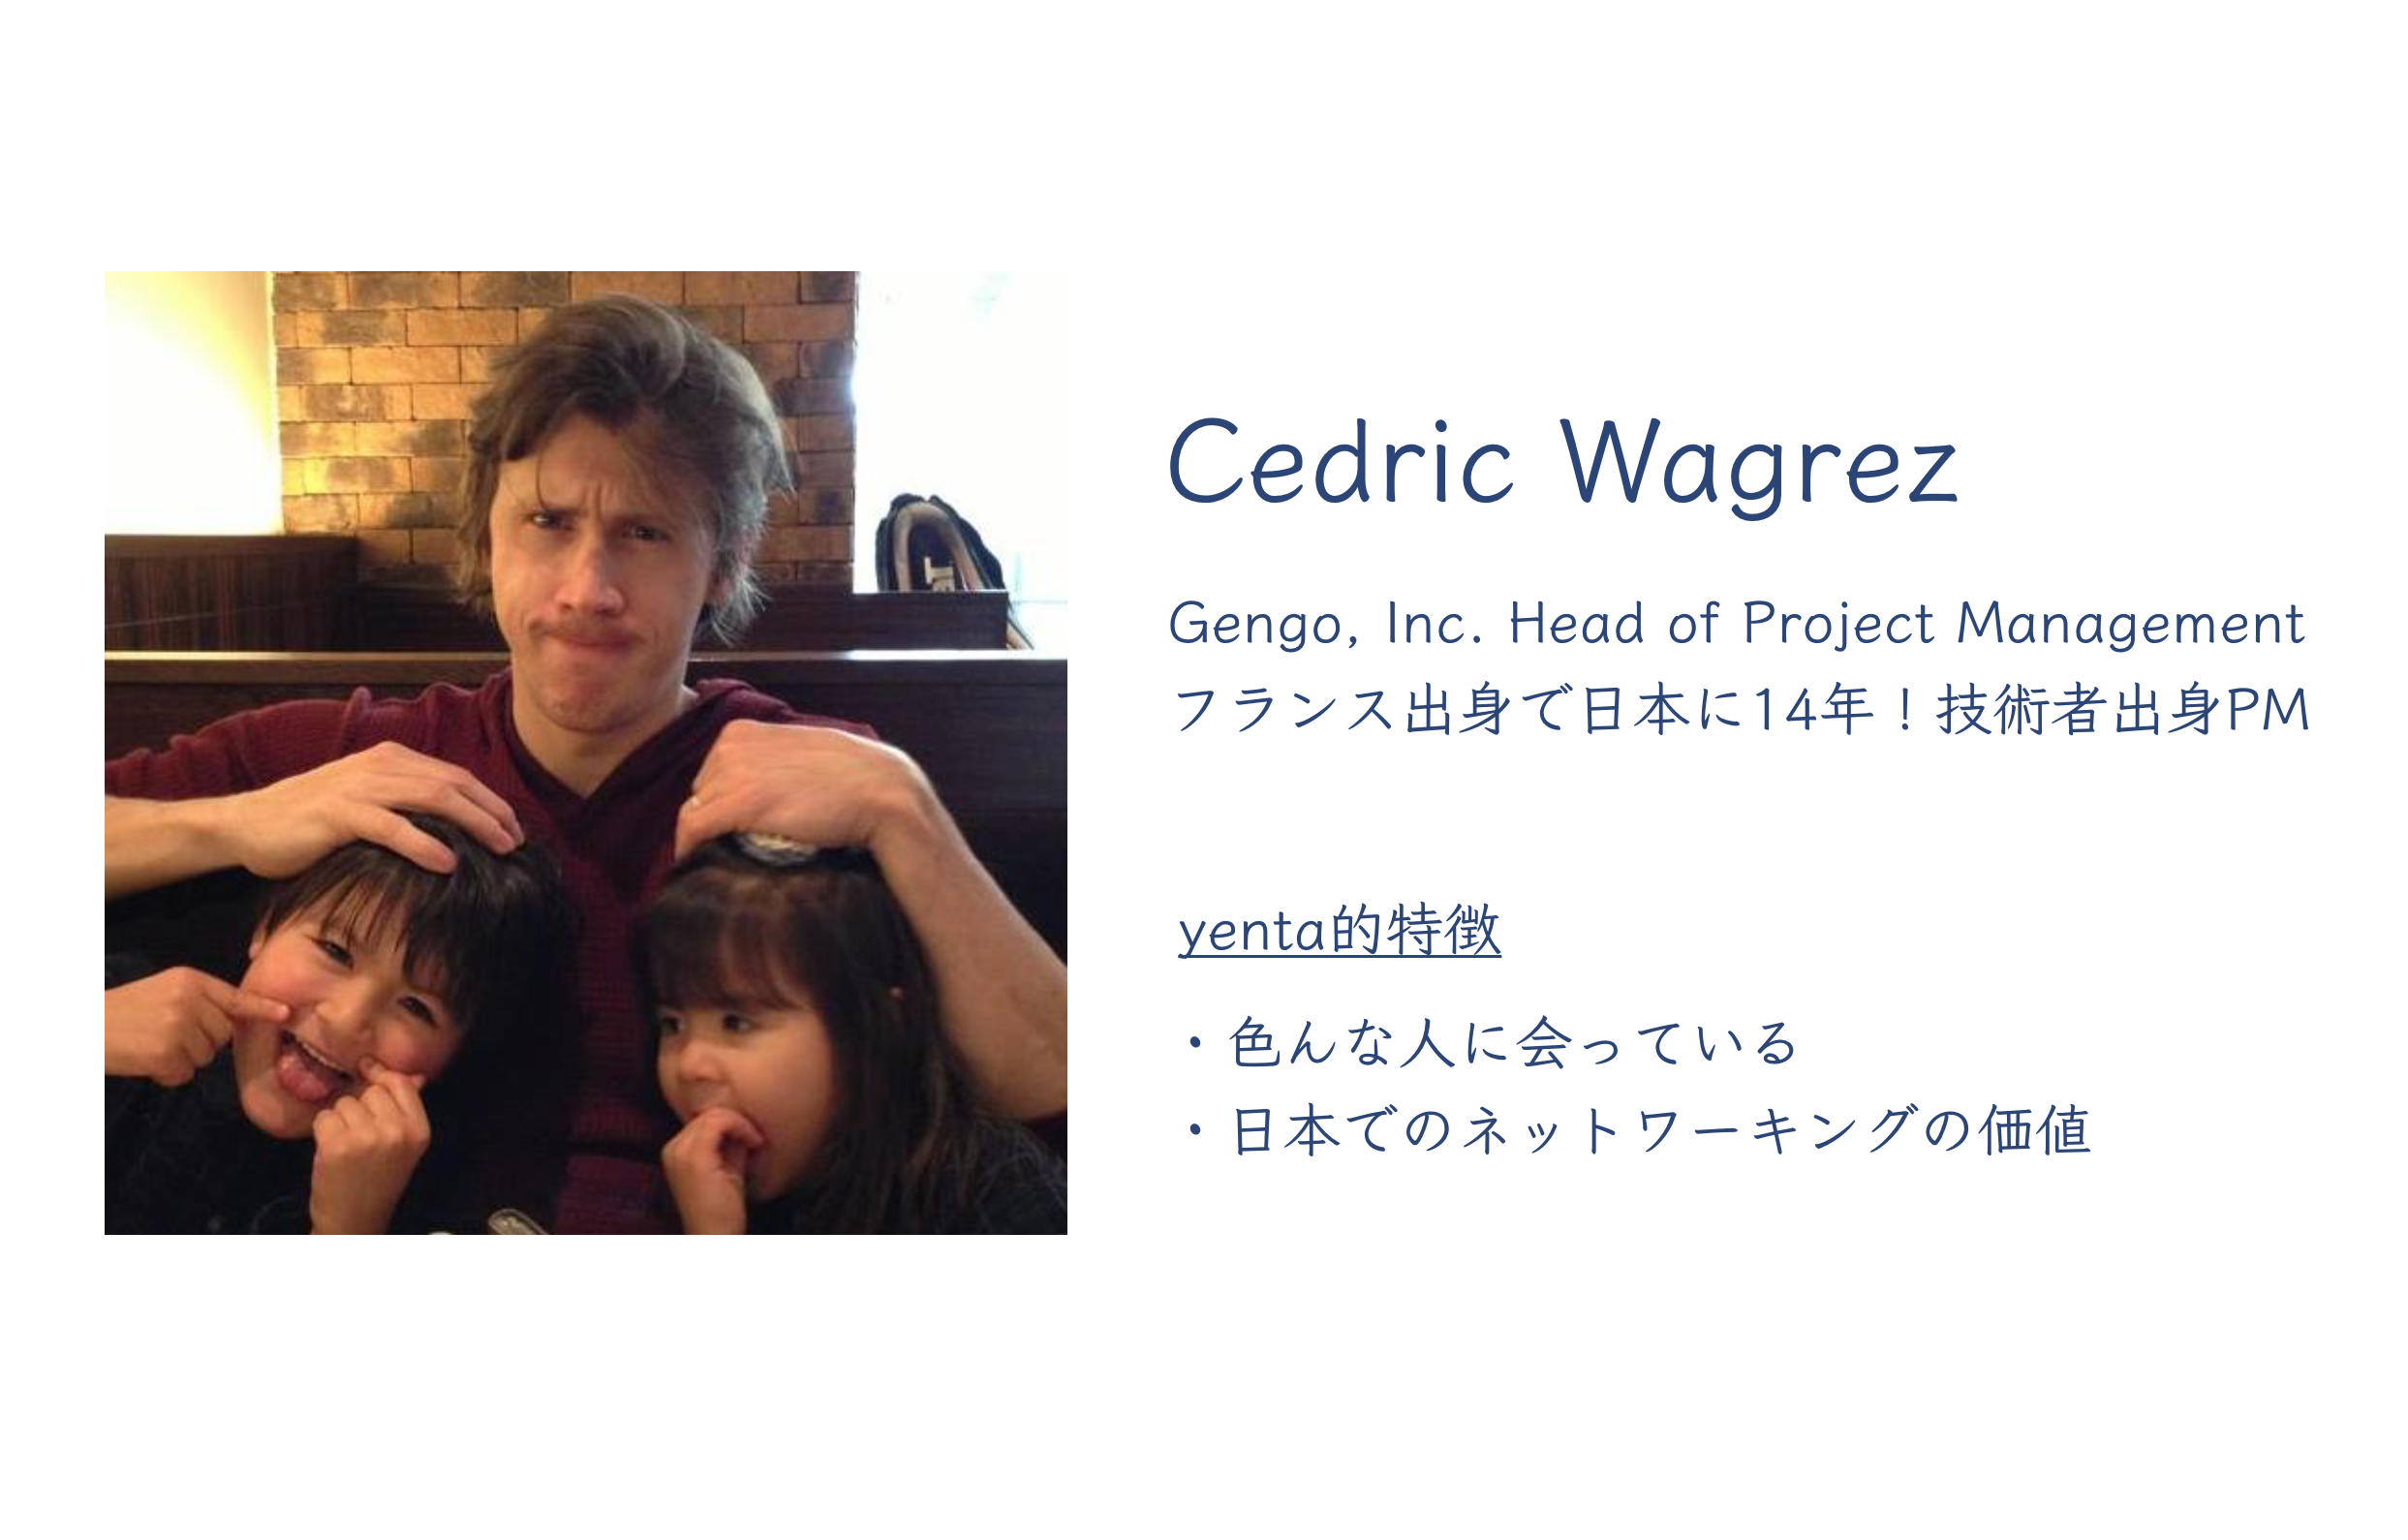 Gengo Head of Project Manager : Cedric Wagrezさん